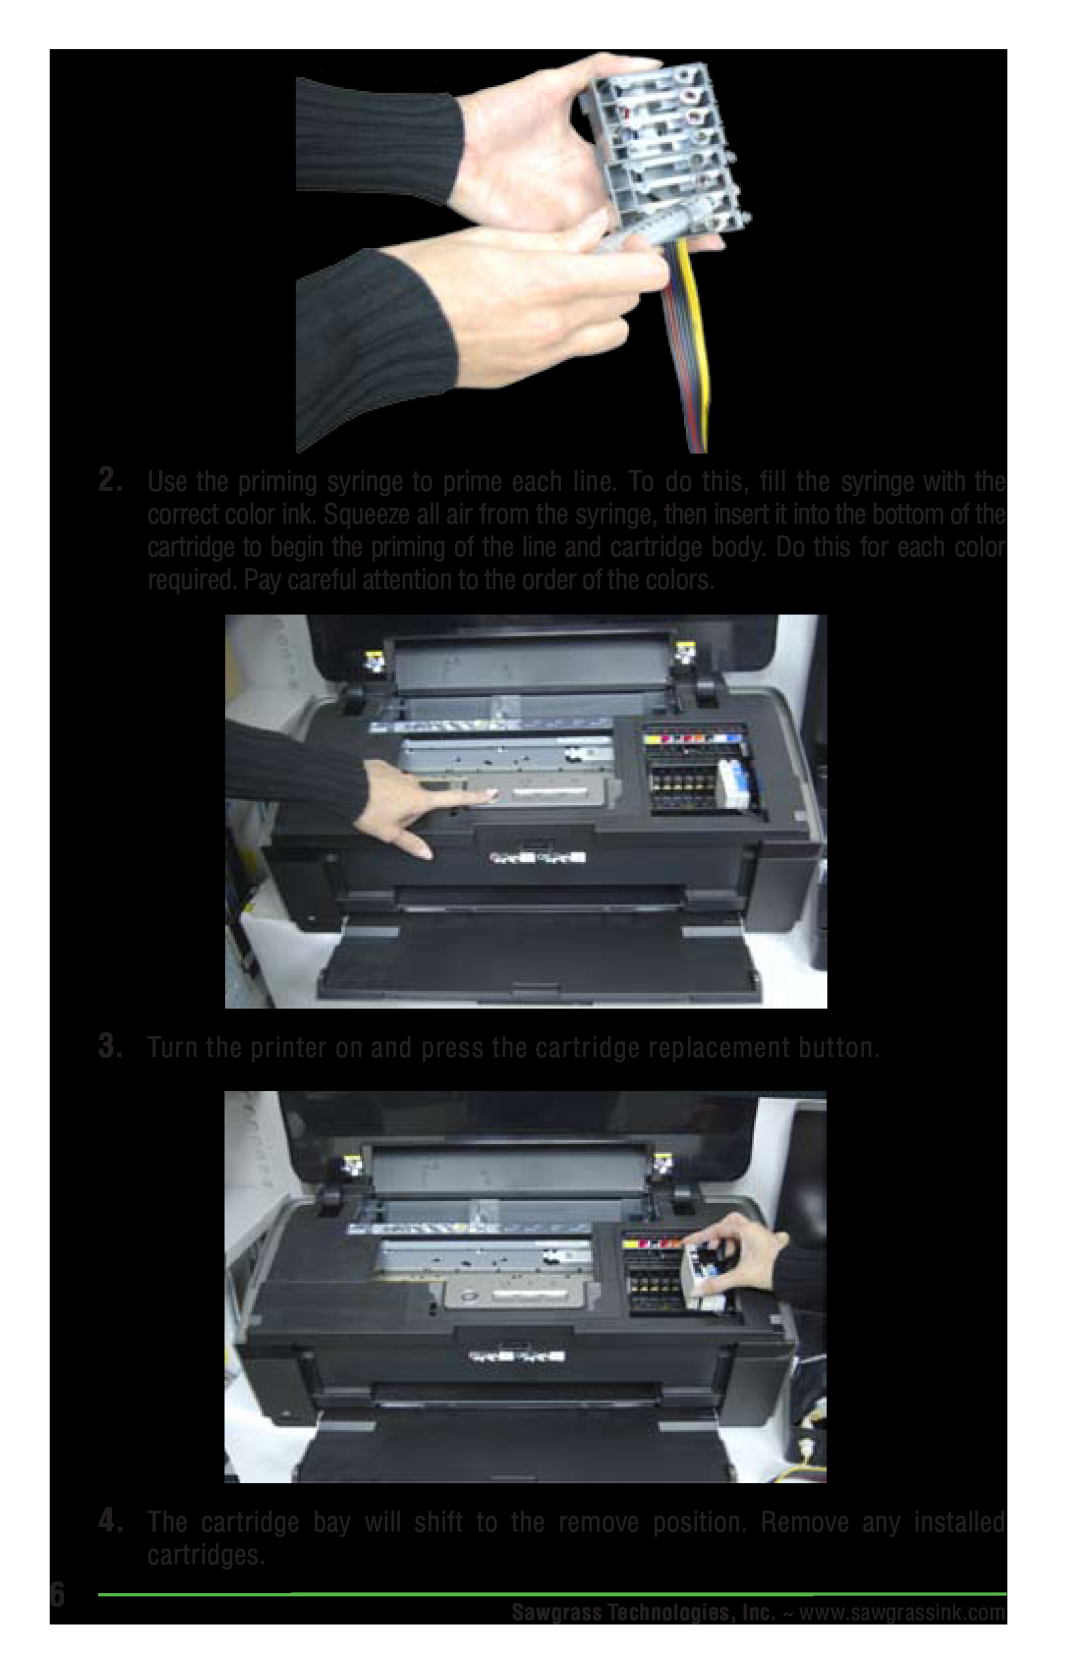 Epson R1900 manual Turn the printer on and press the cartridge replacement button 